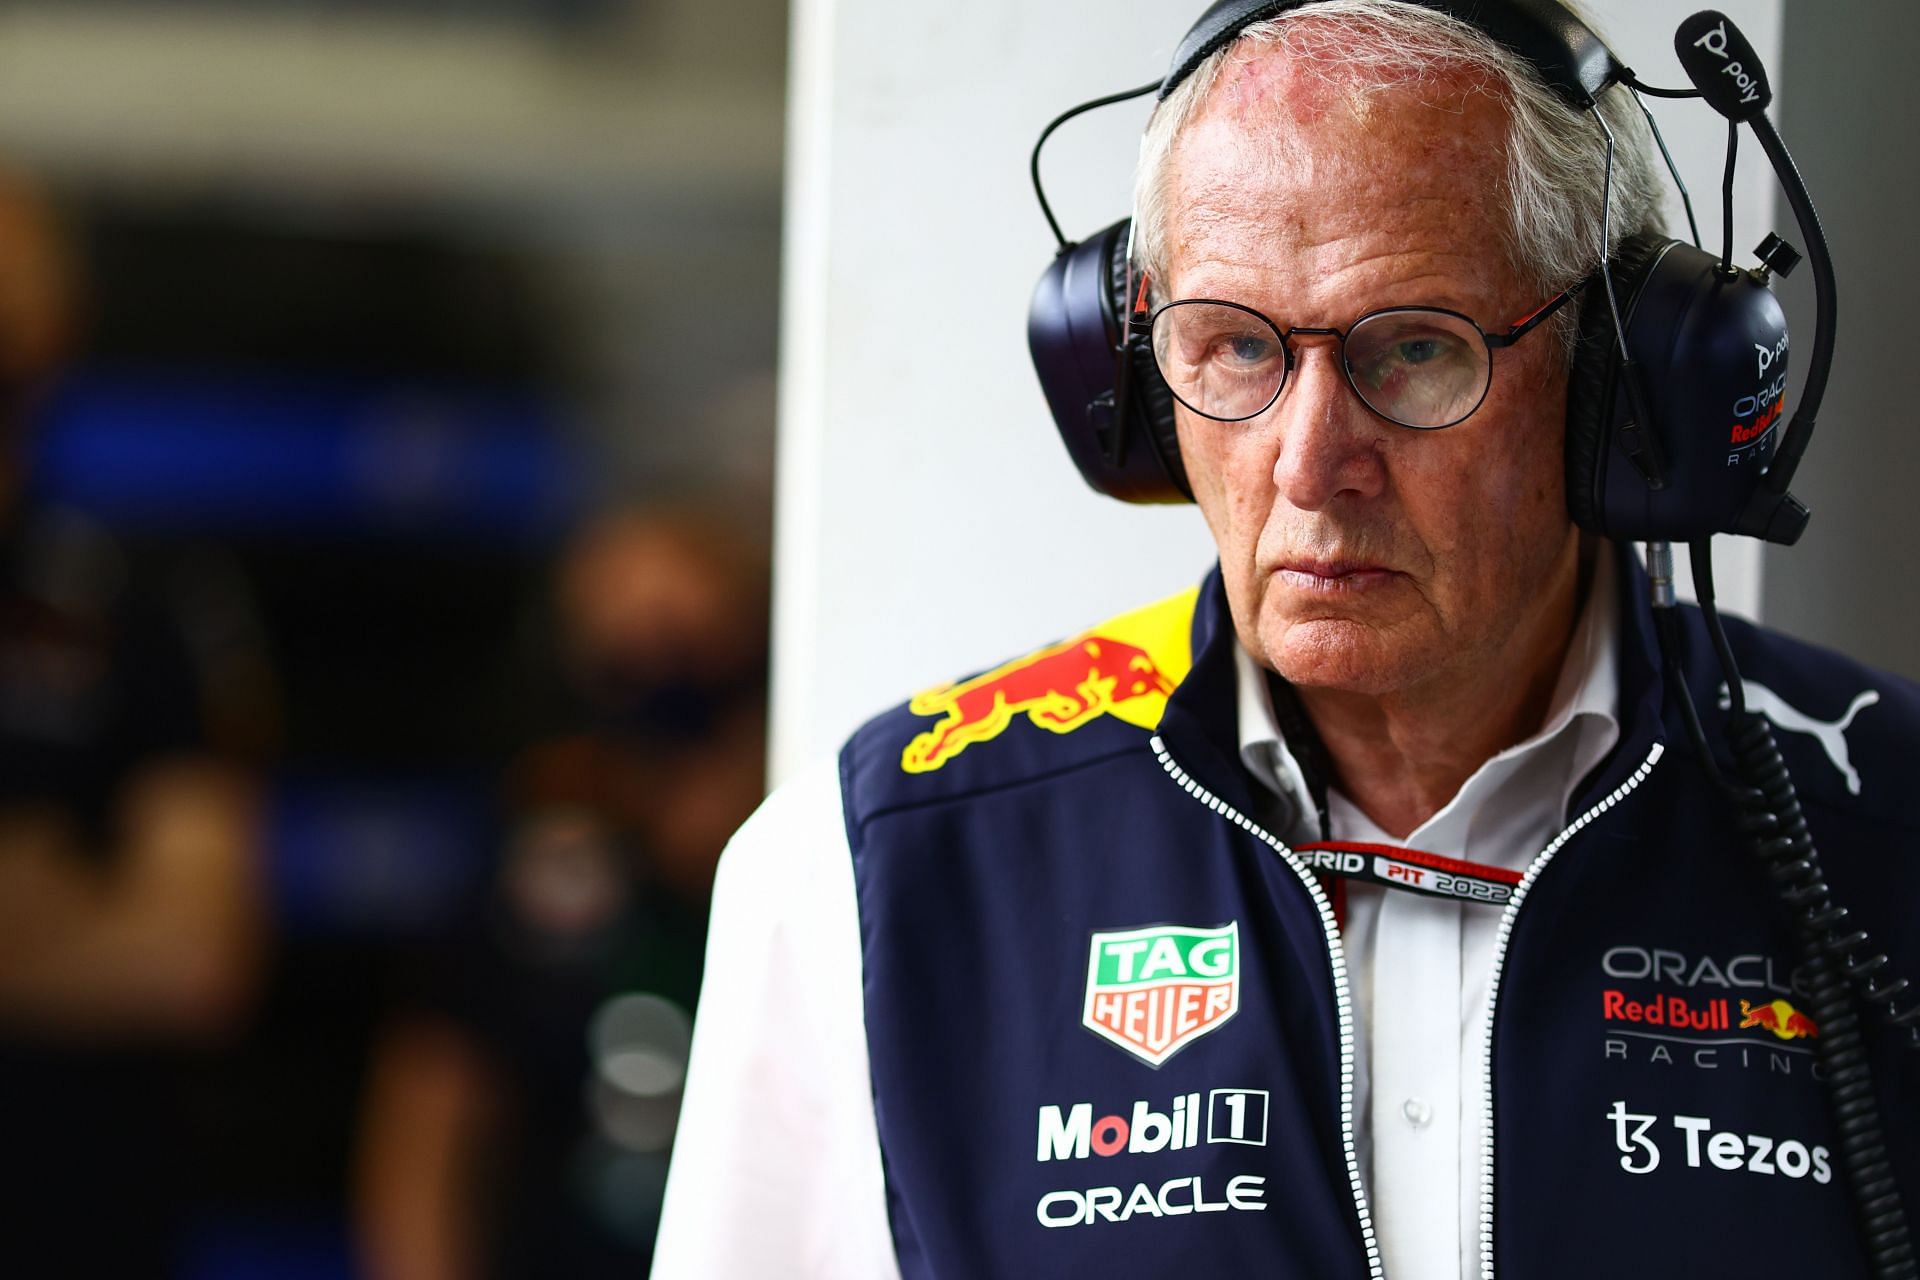 Red Bull Racing team consultant Dr. Helmut Marko looks on in the garage during qualifying ahead of the 2022 F1 Grand Prix of Saudi Arabia. (Photo by Mark Thompson/Getty Images)